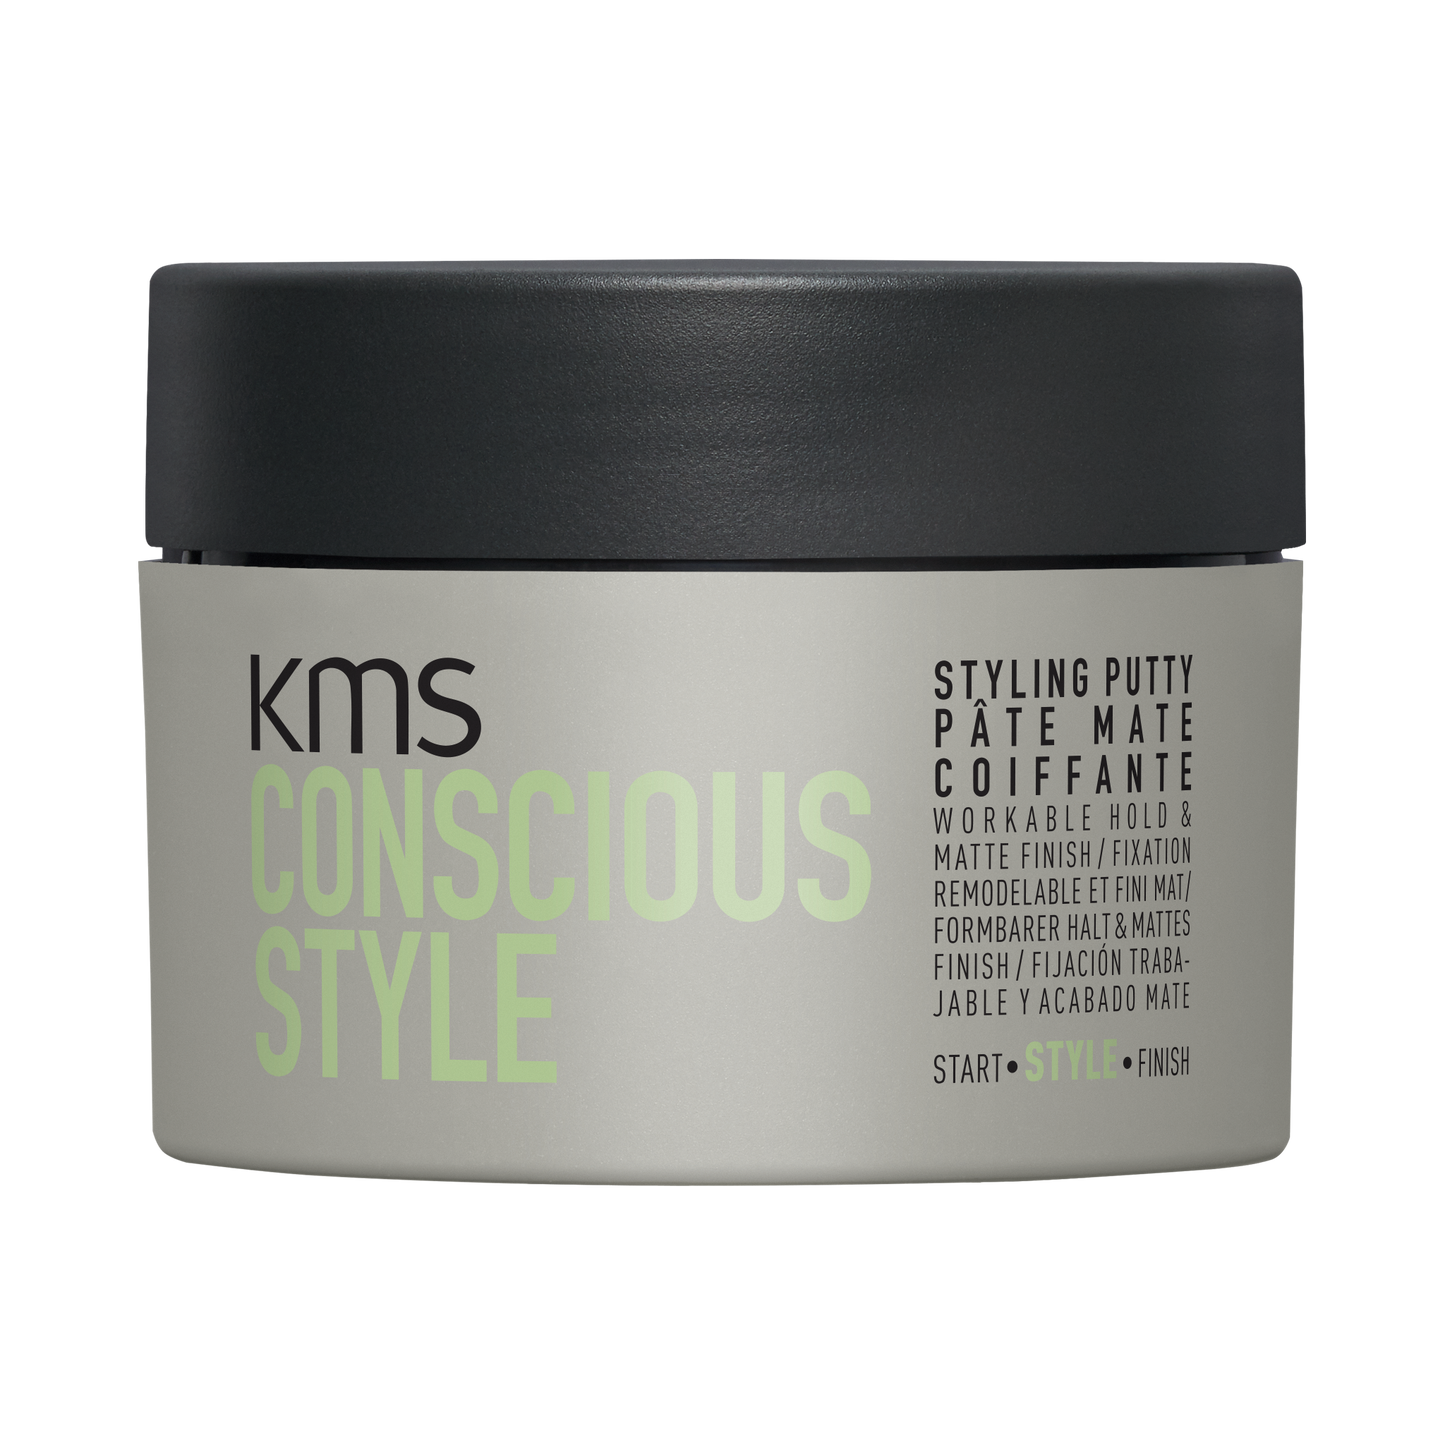 KMS CONSCIOUS STYLE Styling Putty 75mL